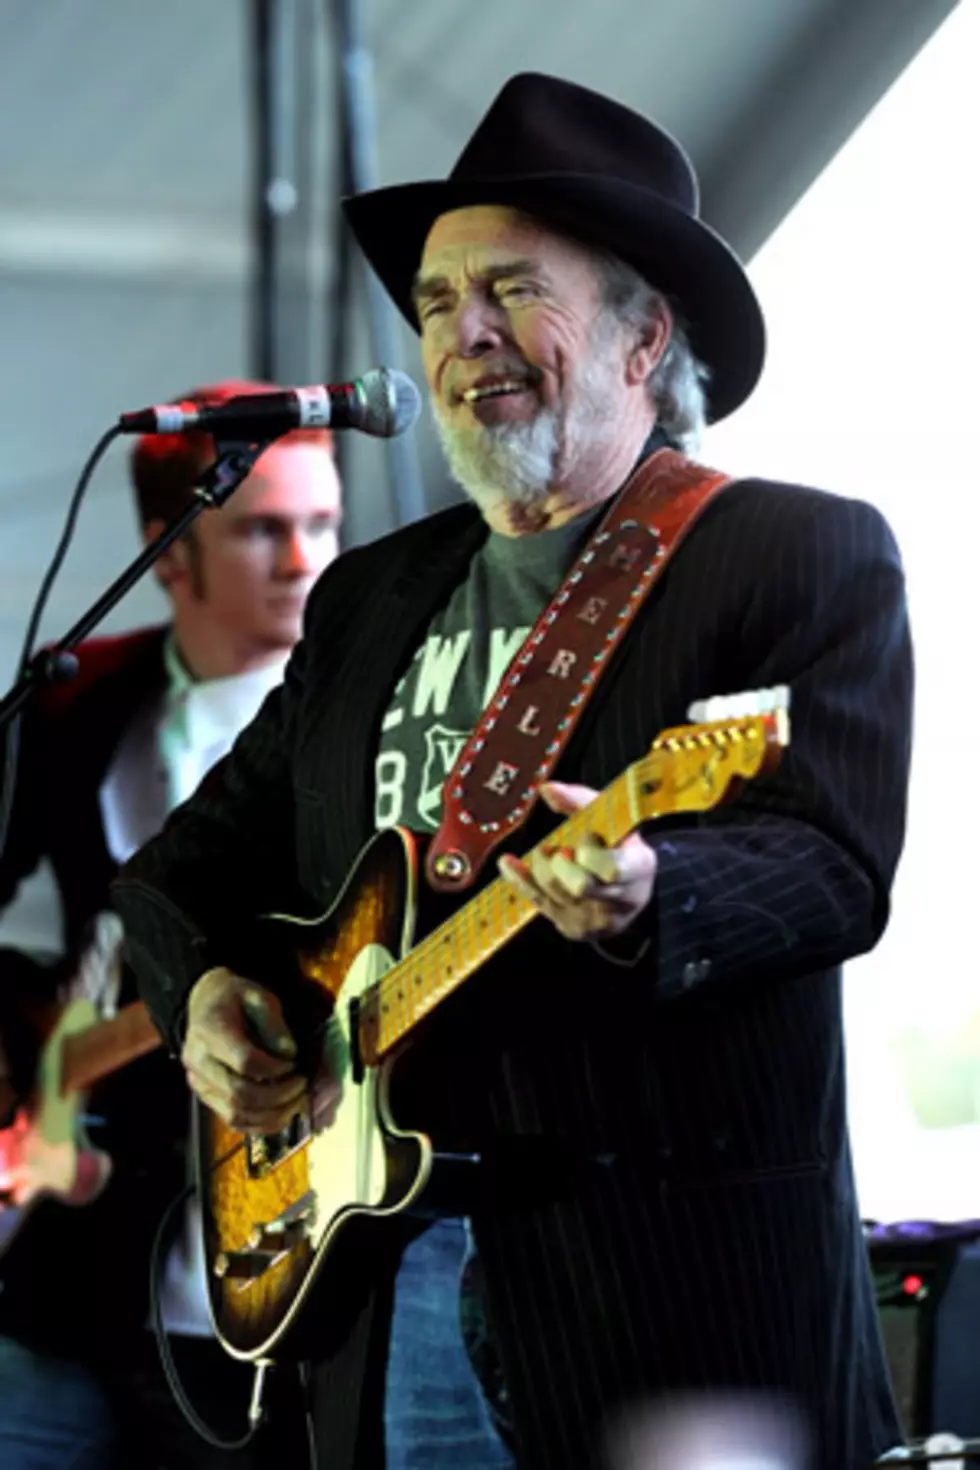 Merle Haggard is Getting Out of the Hospital Hospital